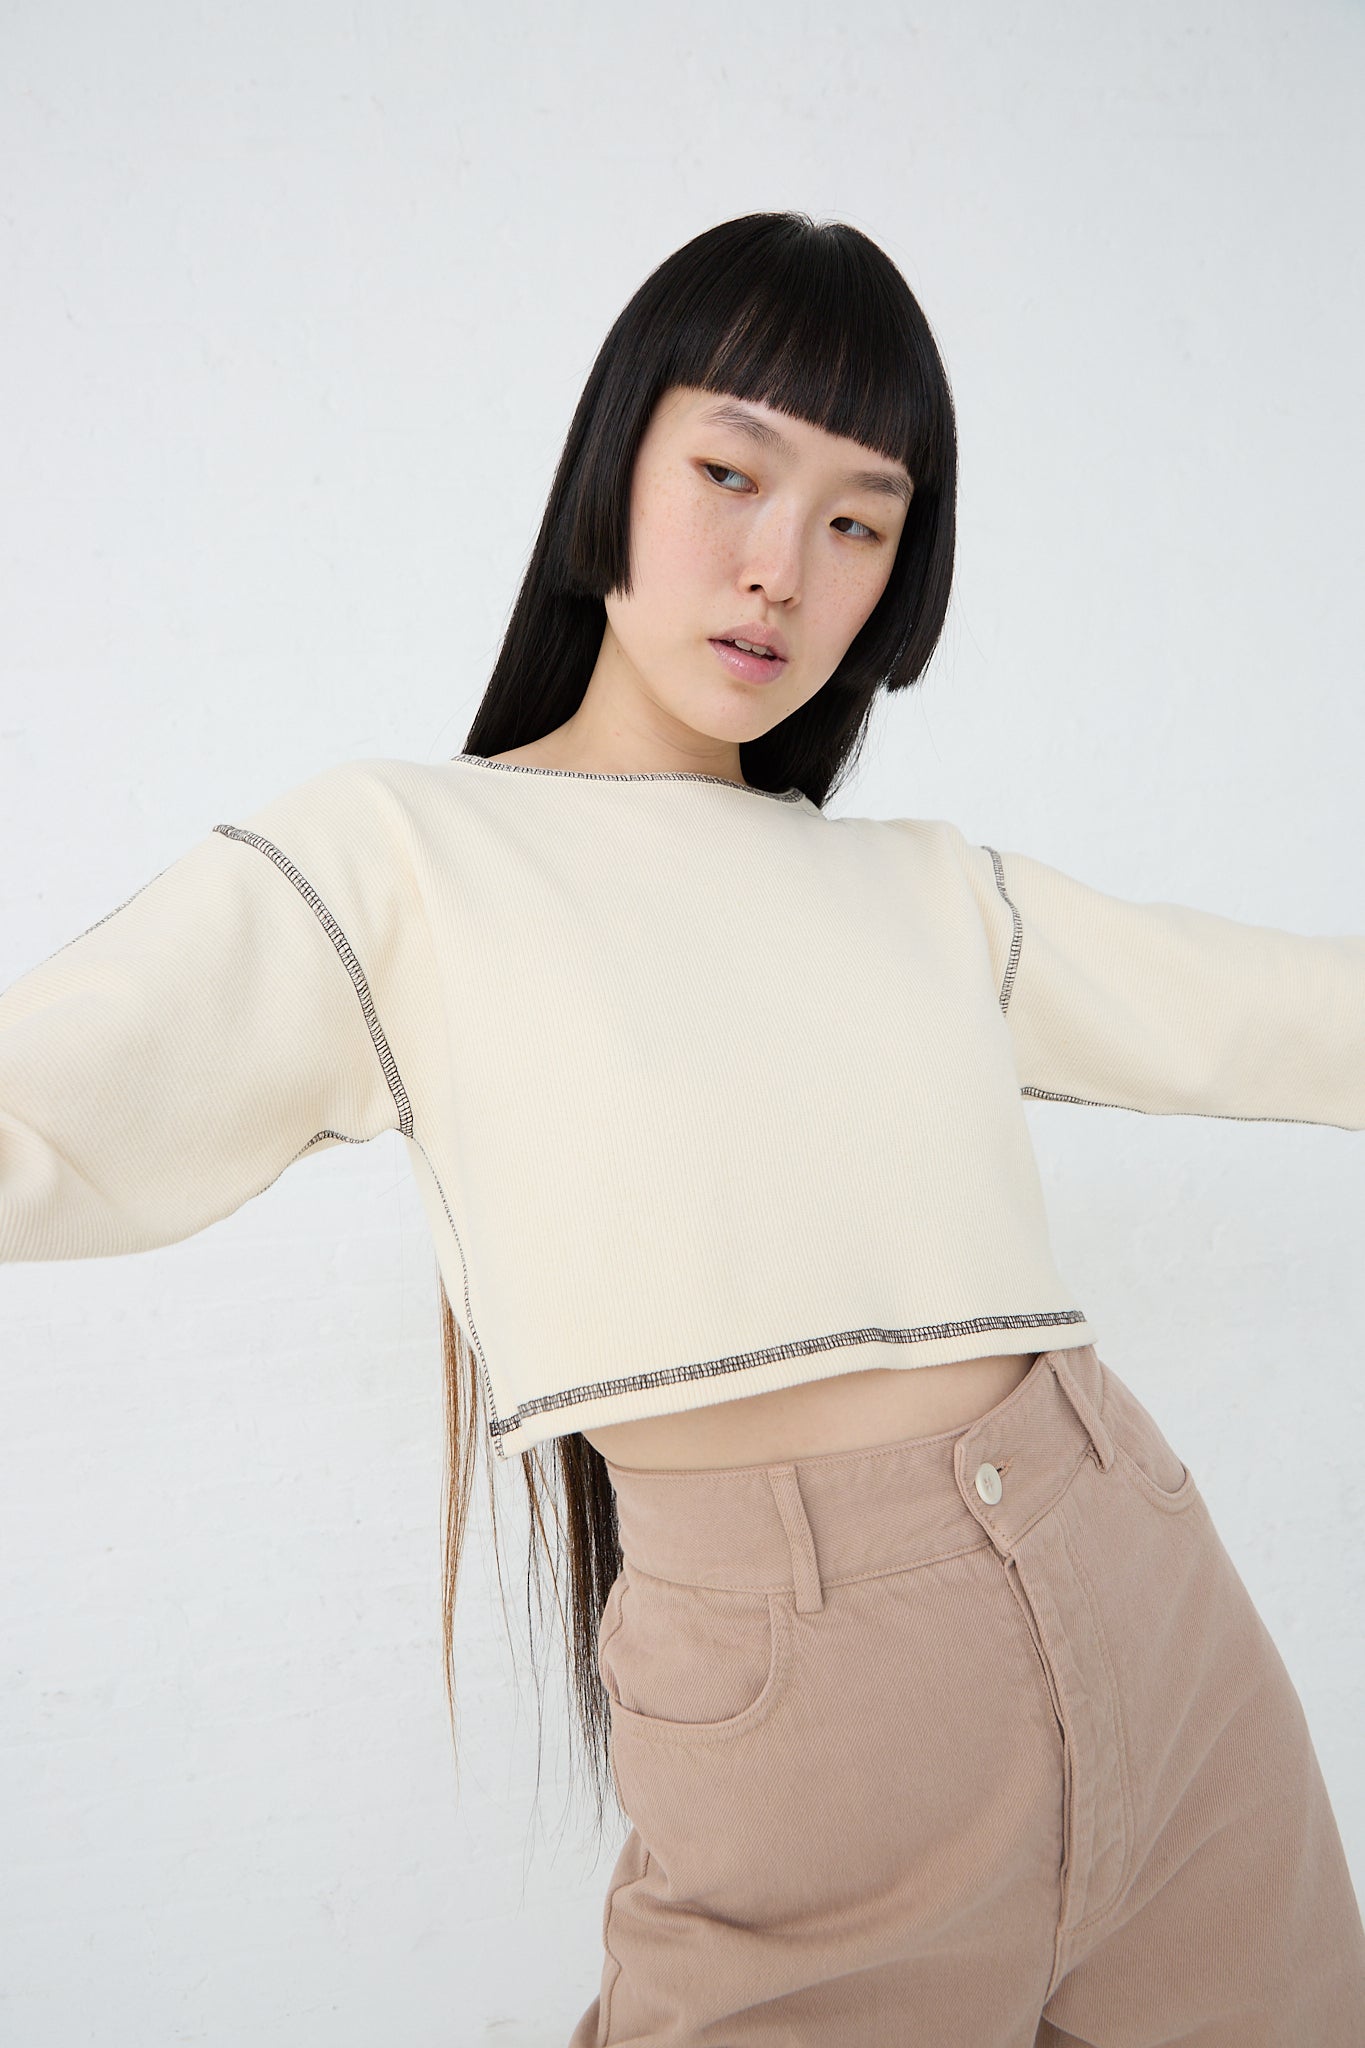 A woman wearing a Cotton Hemp Rib Garble Top in Undyed made by Baserange and tan pants. Front view. Model's arms are raised.